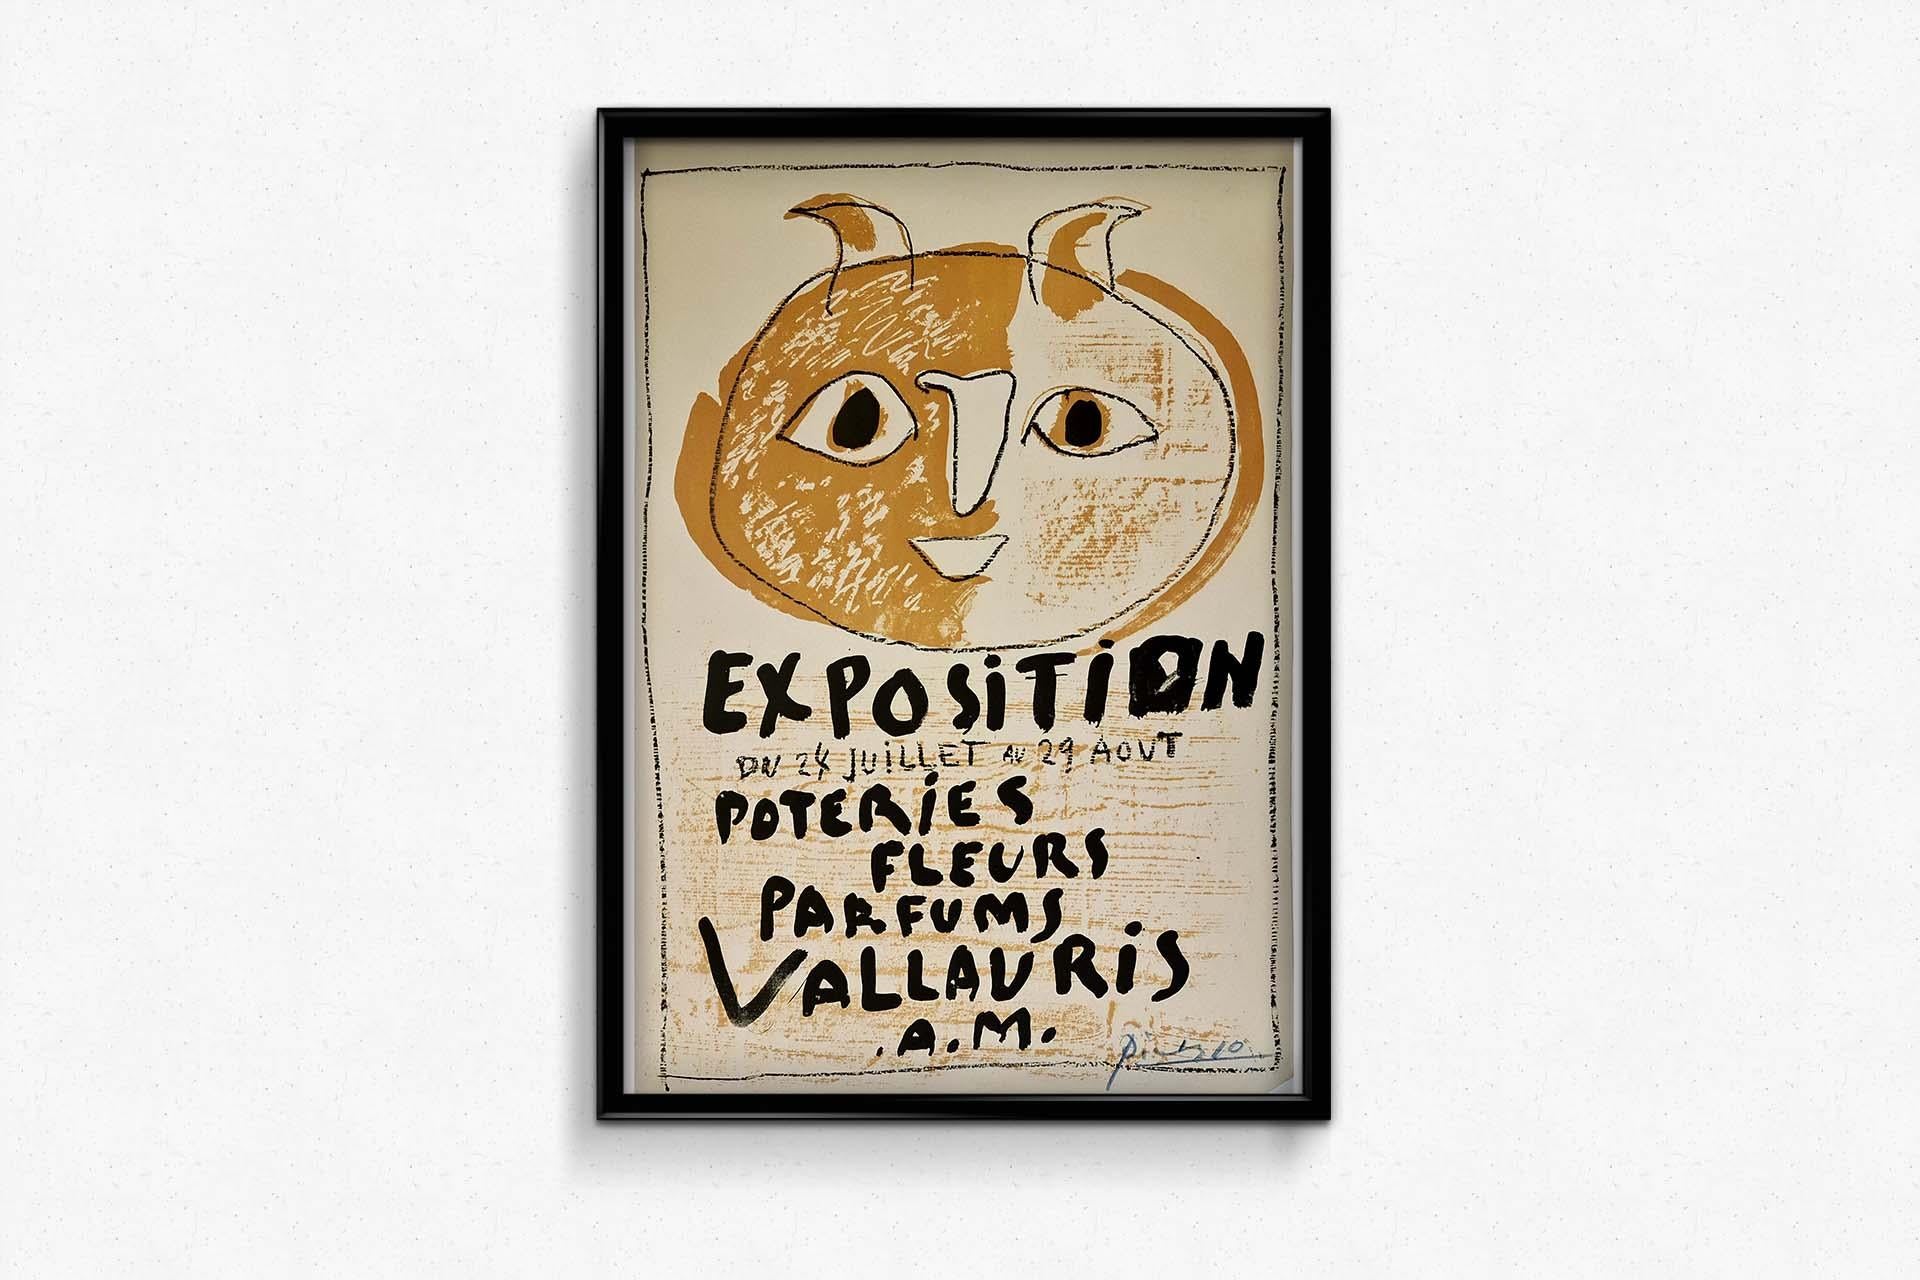 picasso vallauris poster